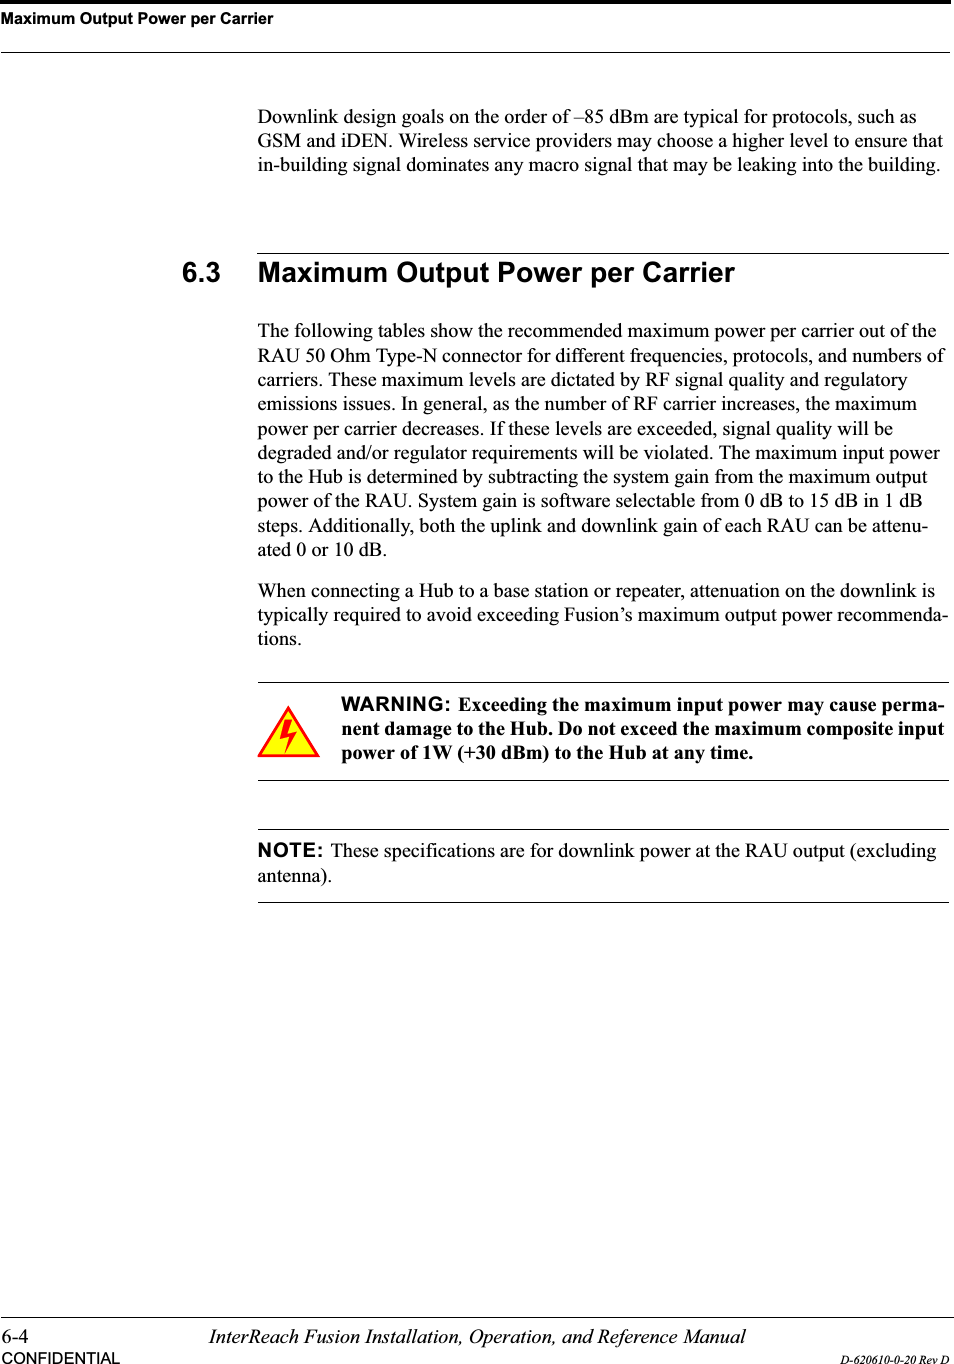 Maximum Output Power per Carrier6-4 InterReach Fusion Installation, Operation, and Reference ManualCONFIDENTIAL D-620610-0-20 Rev DDownlink design goals on the order of –85 dBm are typical for protocols, such as GSM and iDEN. Wireless service providers may choose a higher level to ensure that in-building signal dominates any macro signal that may be leaking into the building.6.3 Maximum Output Power per CarrierThe following tables show the recommended maximum power per carrier out of the RAU 50 Ohm Type-N connector for different frequencies, protocols, and numbers of carriers. These maximum levels are dictated by RF signal quality and regulatory emissions issues. In general, as the number of RF carrier increases, the maximum power per carrier decreases. If these levels are exceeded, signal quality will be degraded and/or regulator requirements will be violated. The maximum input power to the Hub is determined by subtracting the system gain from the maximum output power of the RAU. System gain is software selectable from 0 dB to 15 dB in 1 dB steps. Additionally, both the uplink and downlink gain of each RAU can be attenu-ated 0 or 10 dB.When connecting a Hub to a base station or repeater, attenuation on the downlink is typically required to avoid exceeding Fusion’s maximum output power recommenda-tions.WARNING: Exceeding the maximum input power may cause perma-nent damage to the Hub. Do not exceed the maximum composite input power of 1W (+30 dBm) to the Hub at any time.NOTE: These specifications are for downlink power at the RAU output (excluding antenna).